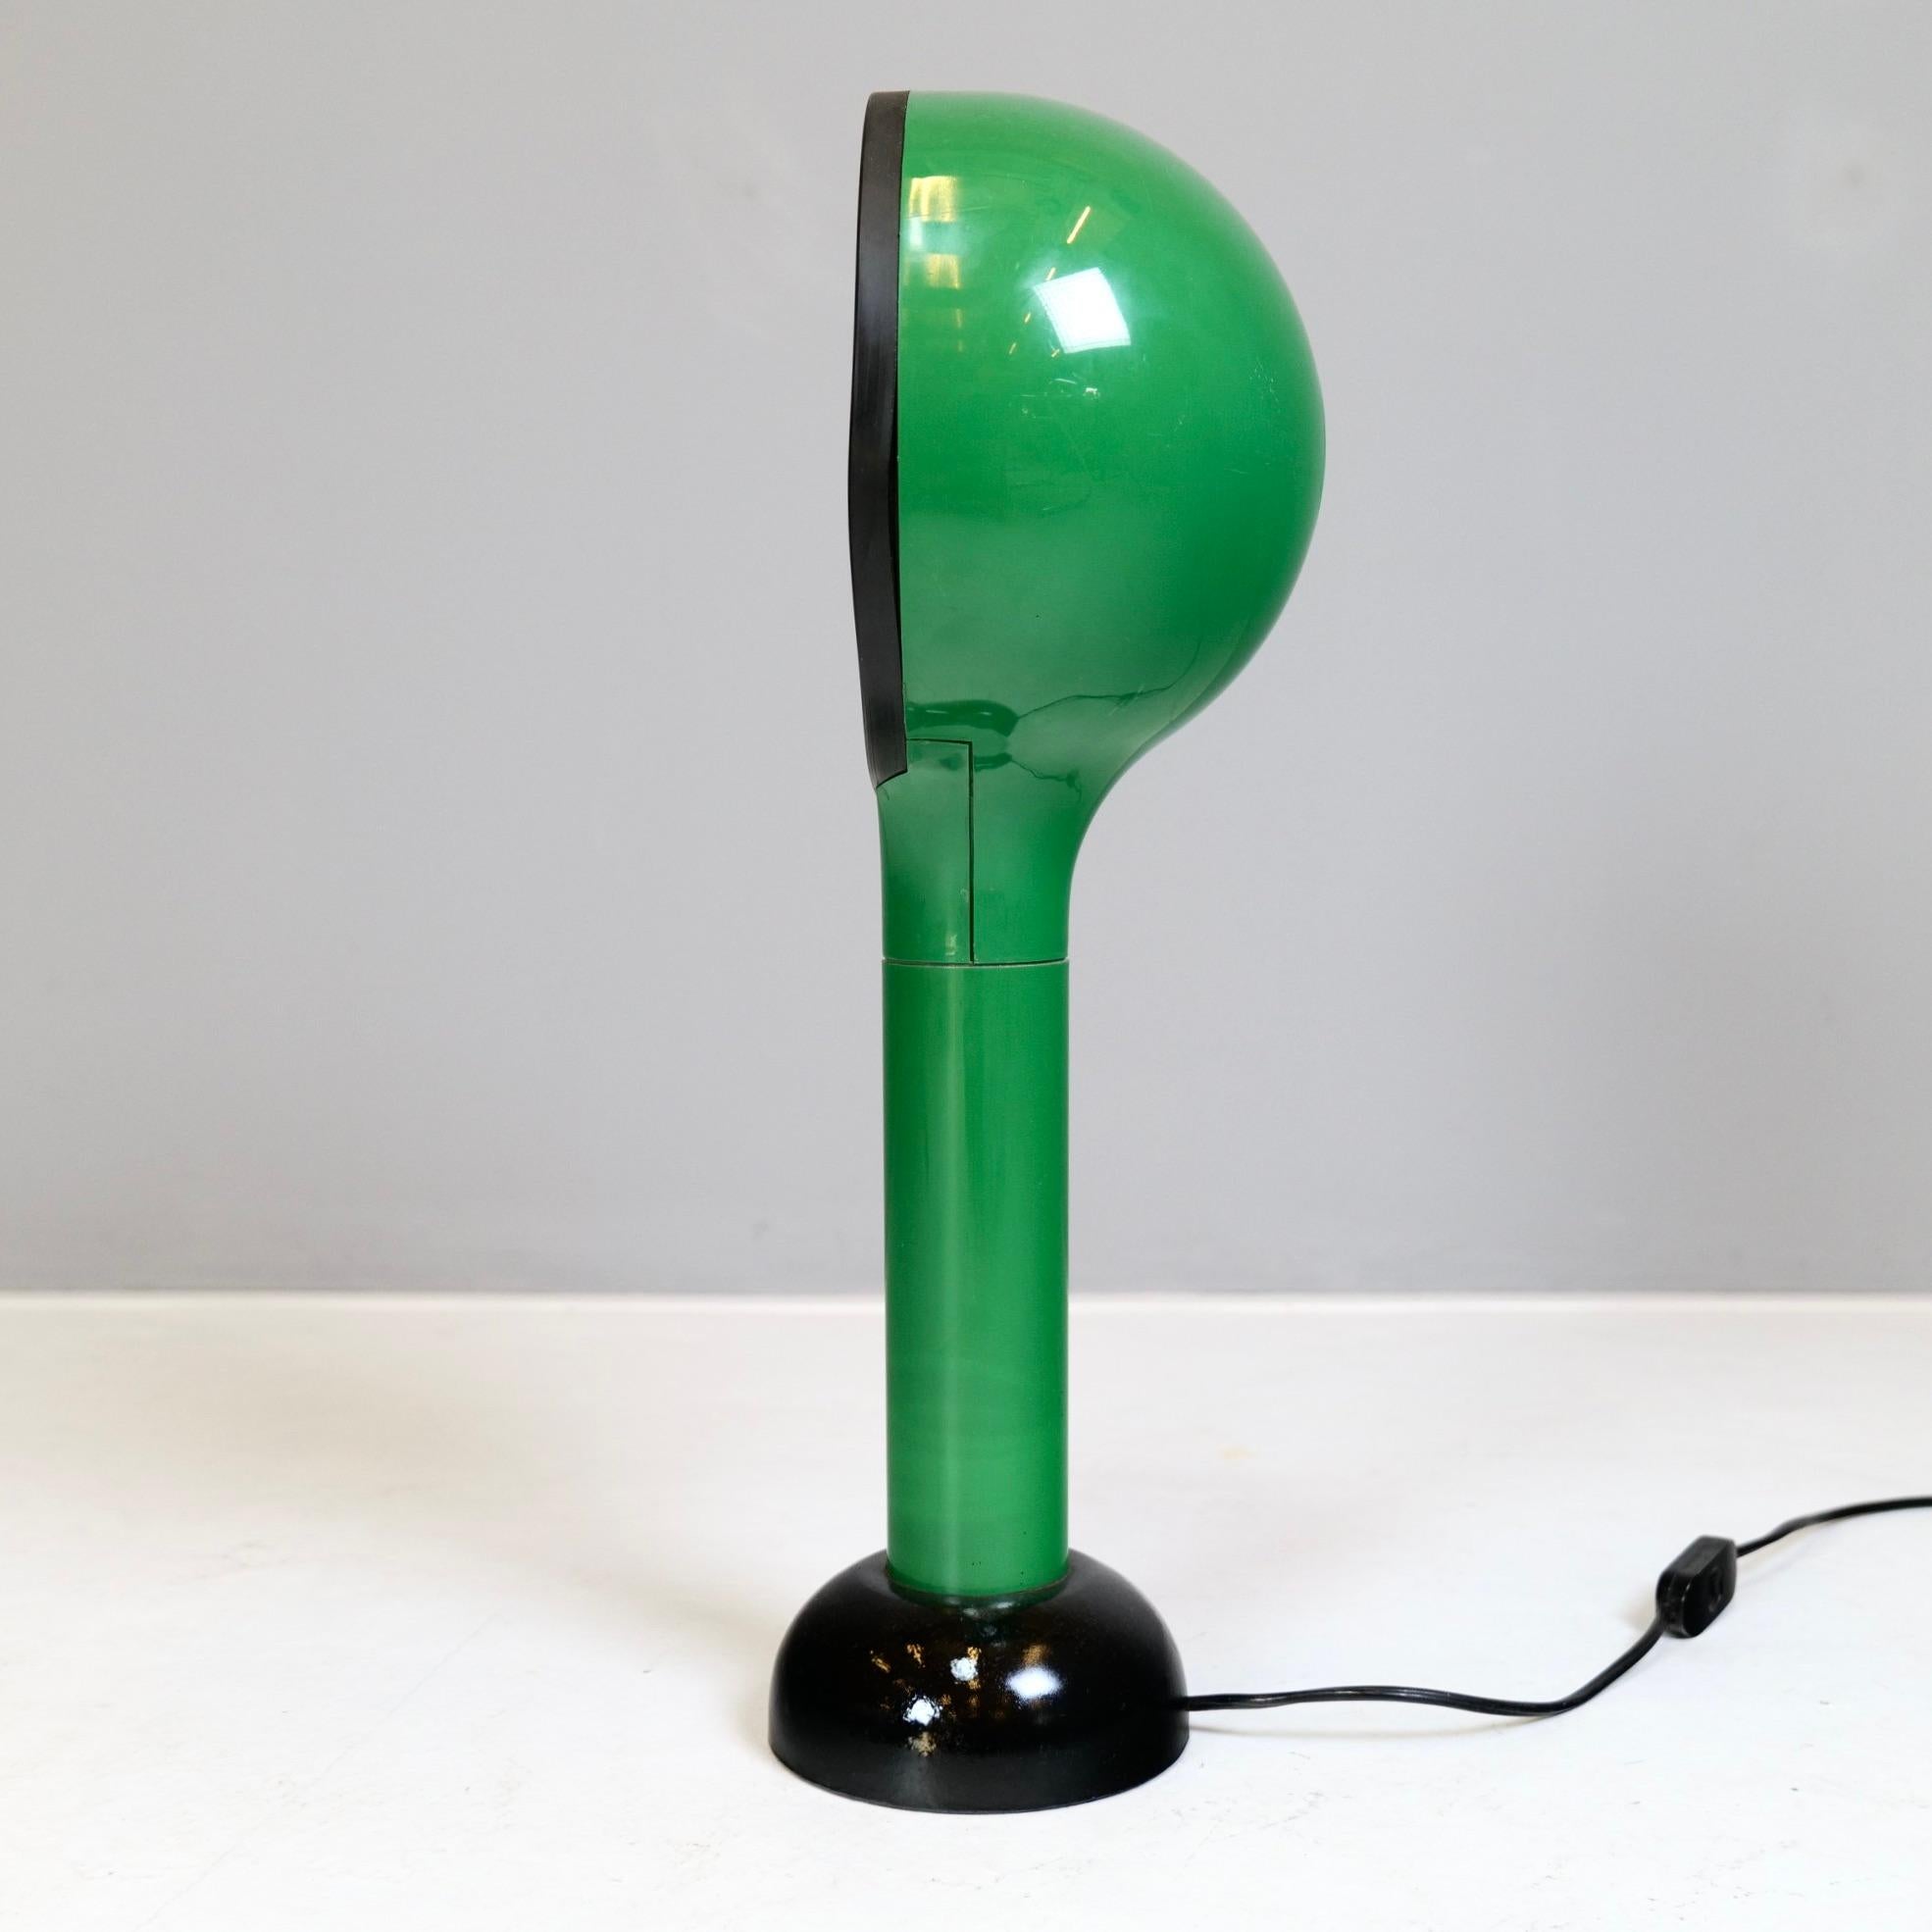 1970s green space age desk lamp
Dimensions:
52 cm heigh
22 cm width
14 cm width
materials:
abs plastic, glass
good condition with slight signs of use.
No brakes or chips.